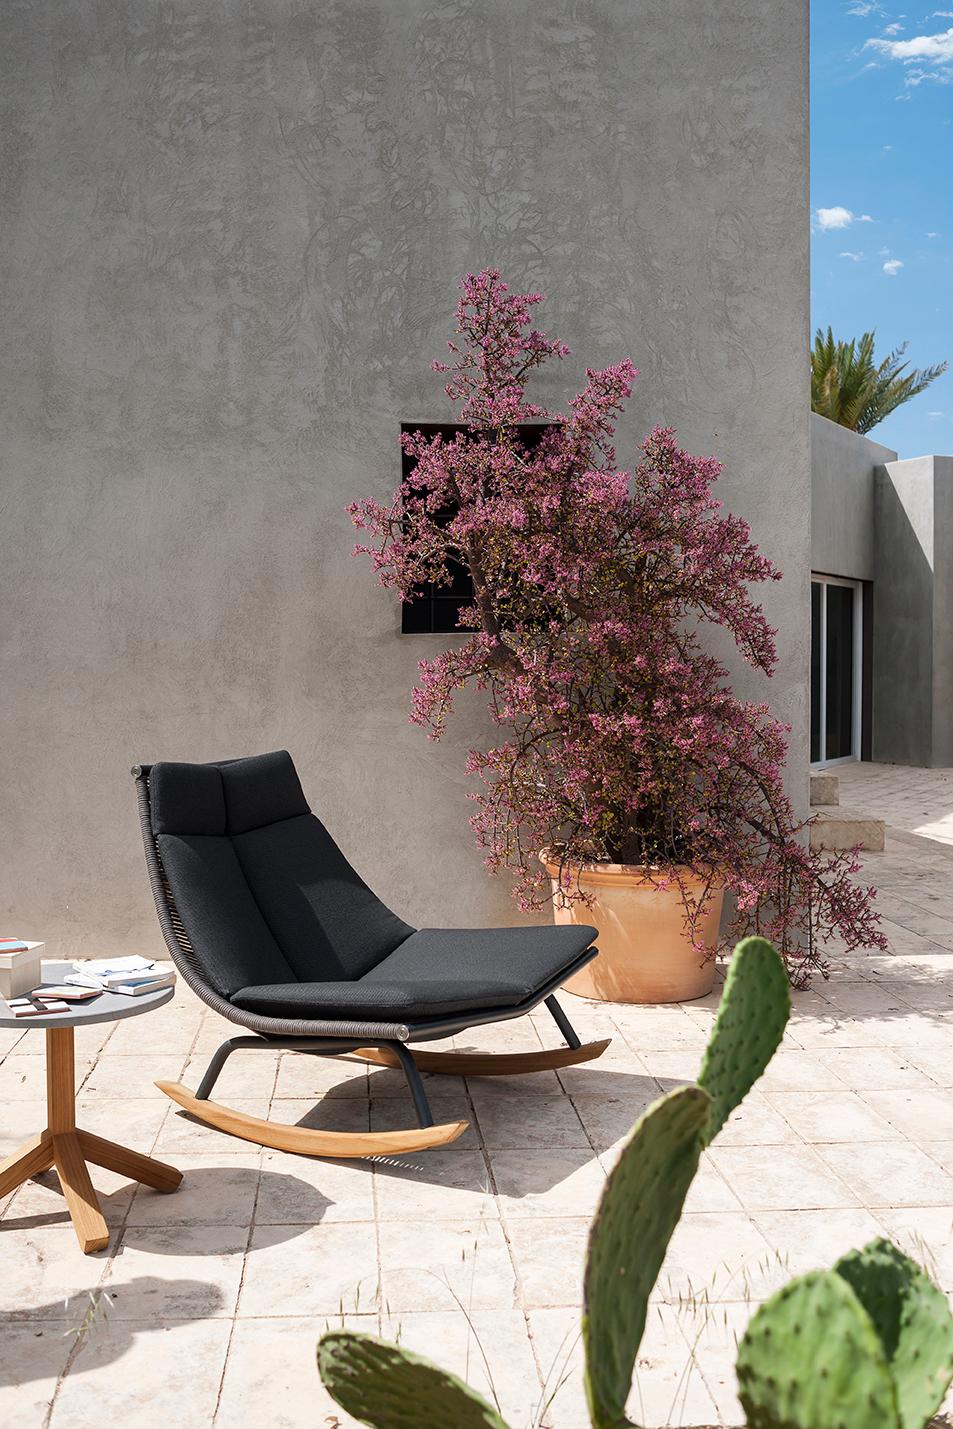 Laze outdoor lounge chairs are designed as 